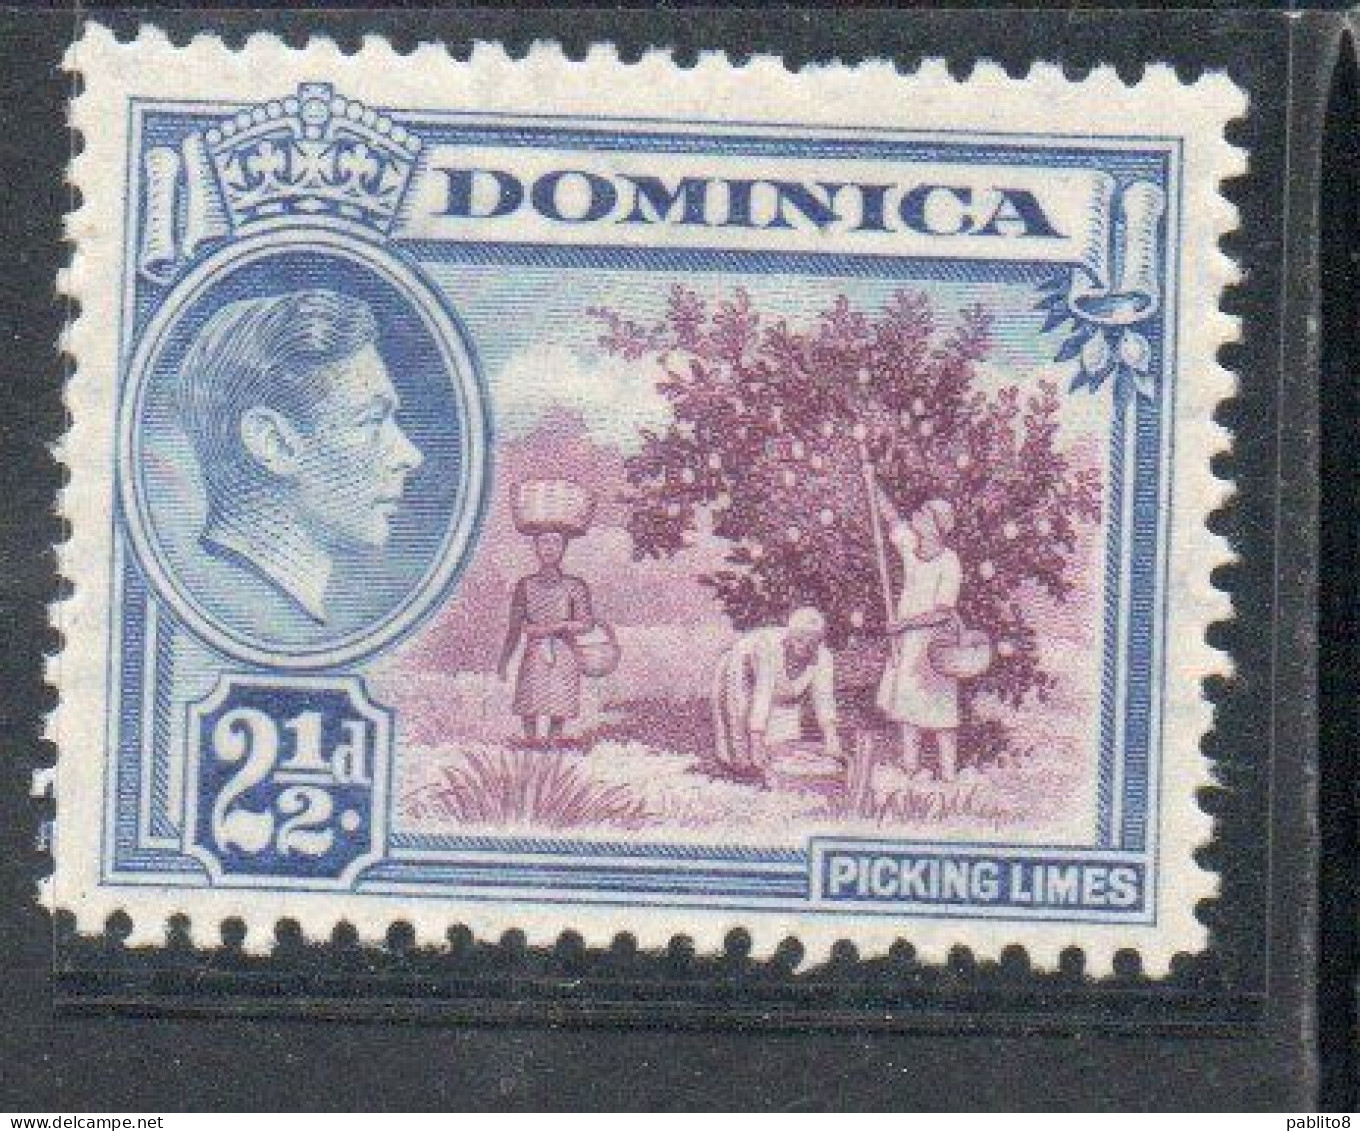 DOMINICA 1938 1947 KING GEORGE V 2 1/2p MNH - Dominica (...-1978)